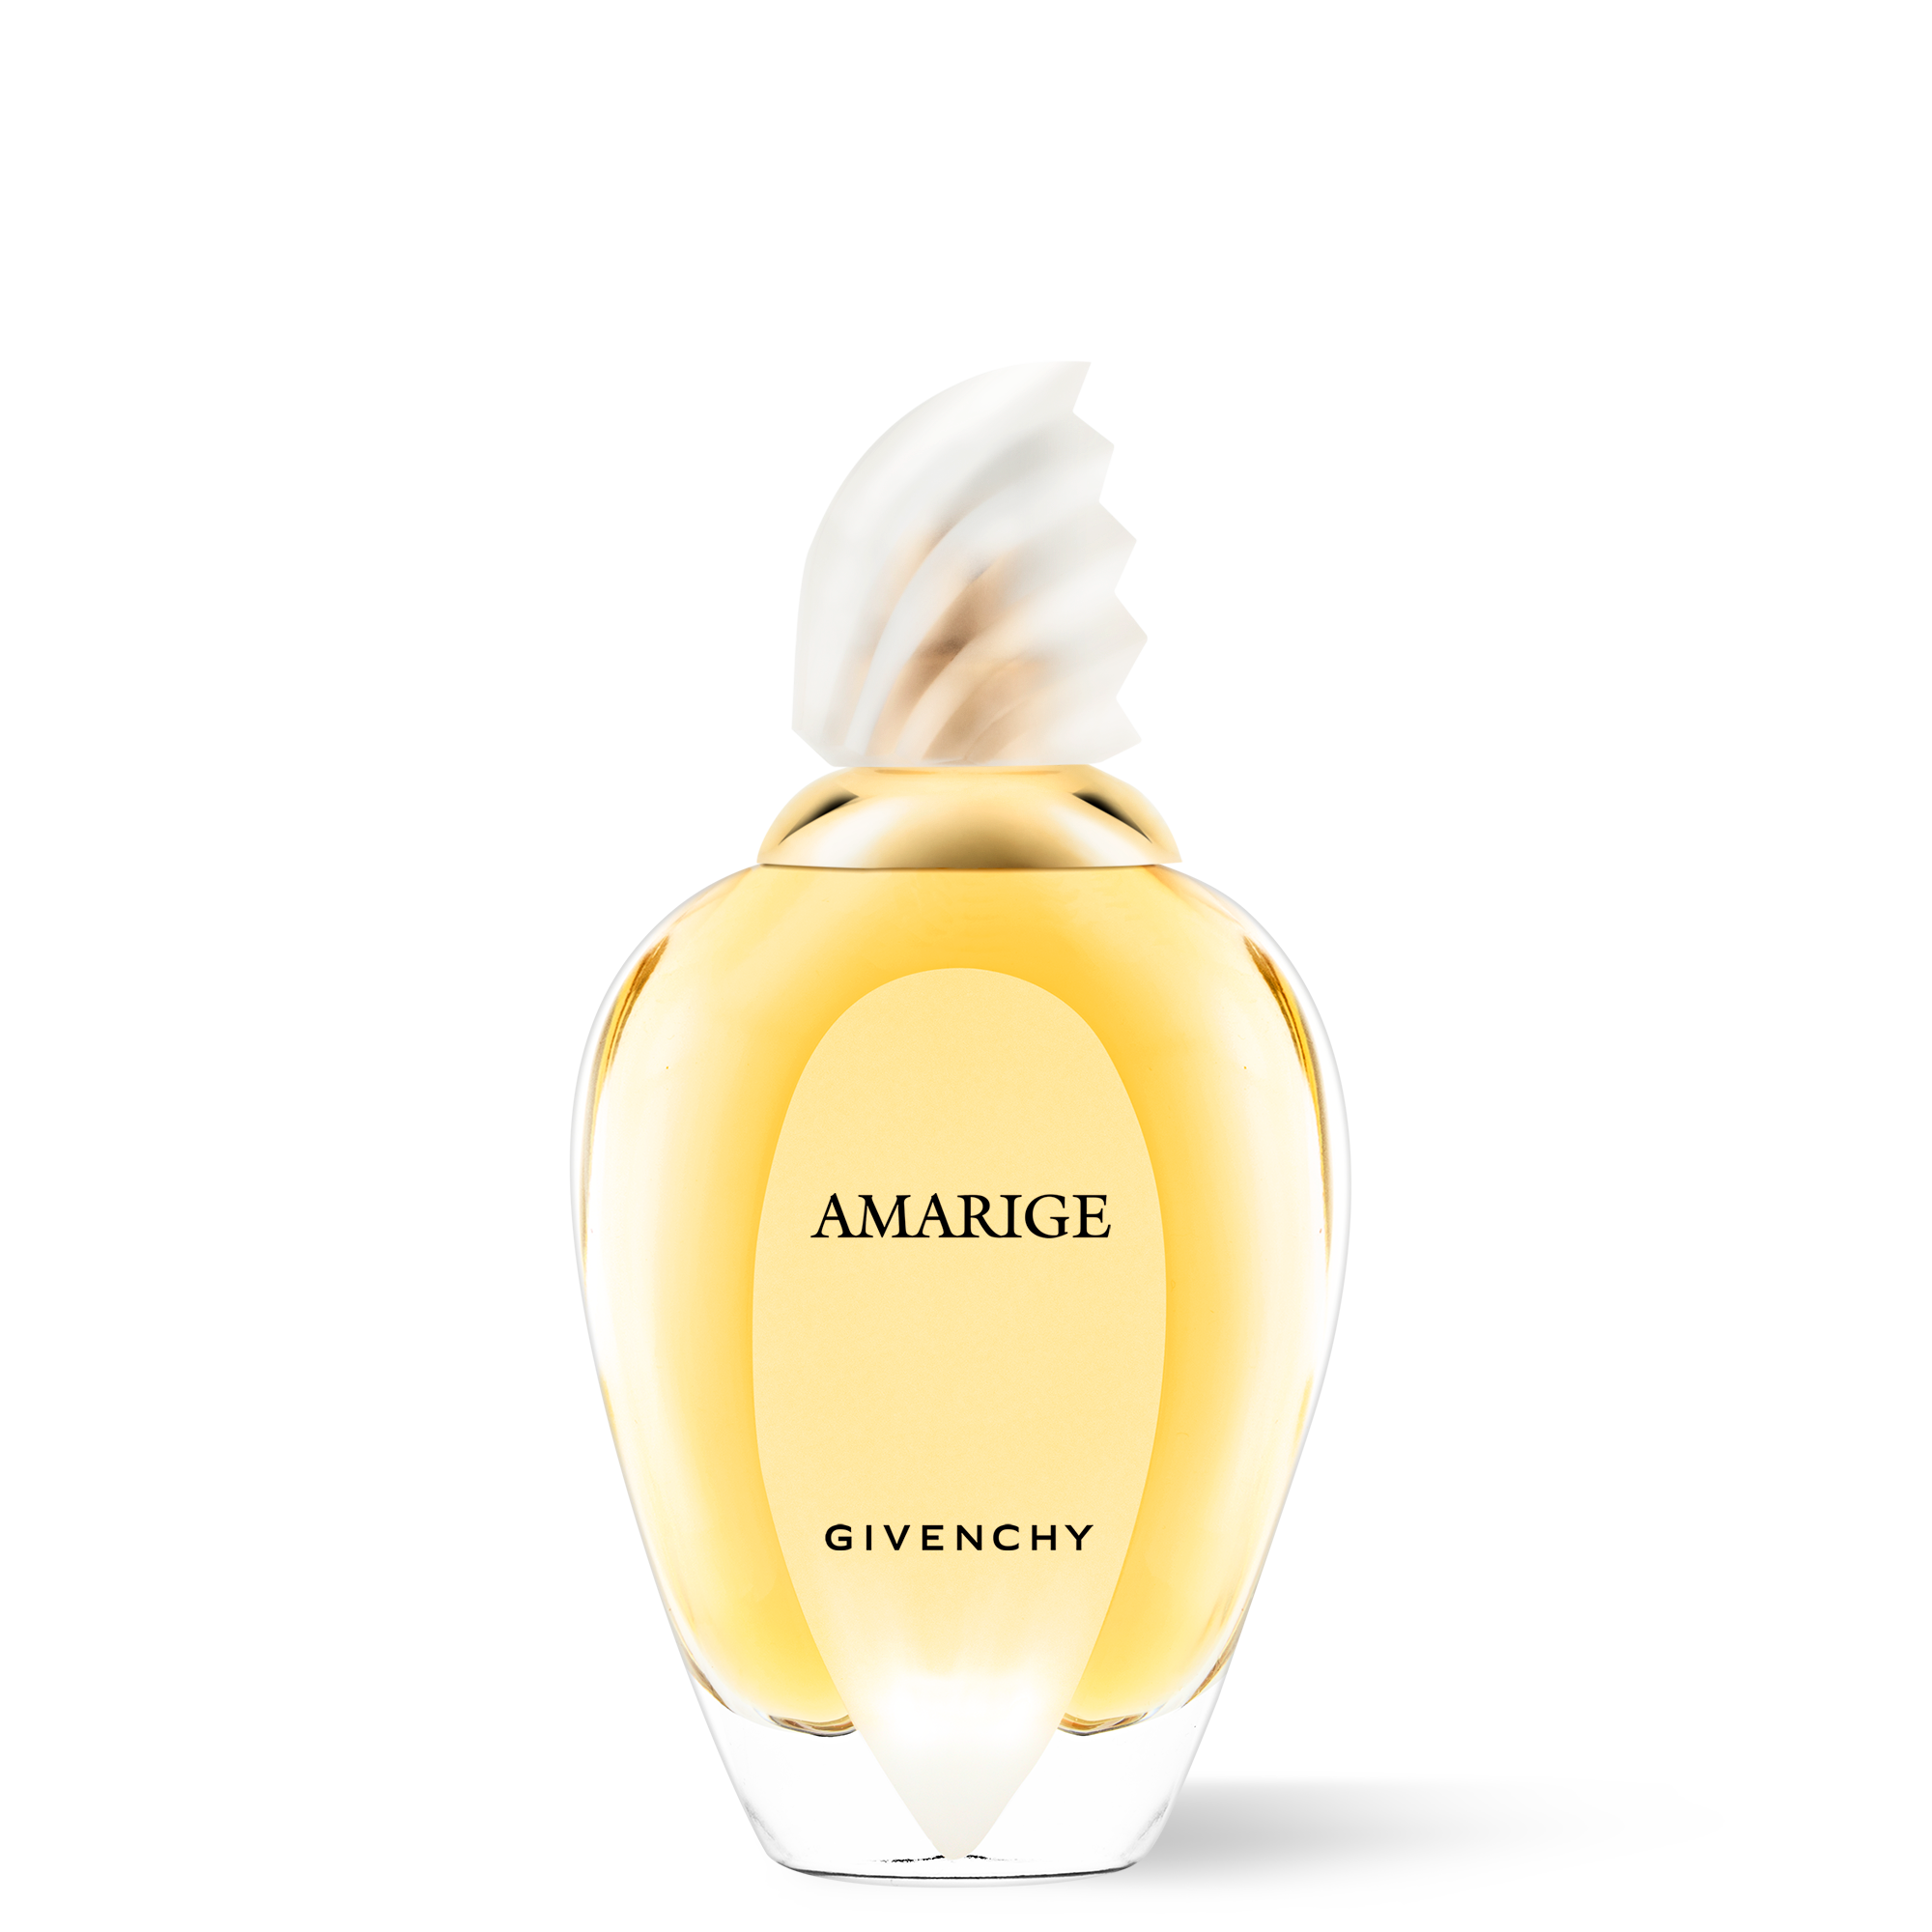 amarige perfume by givenchy